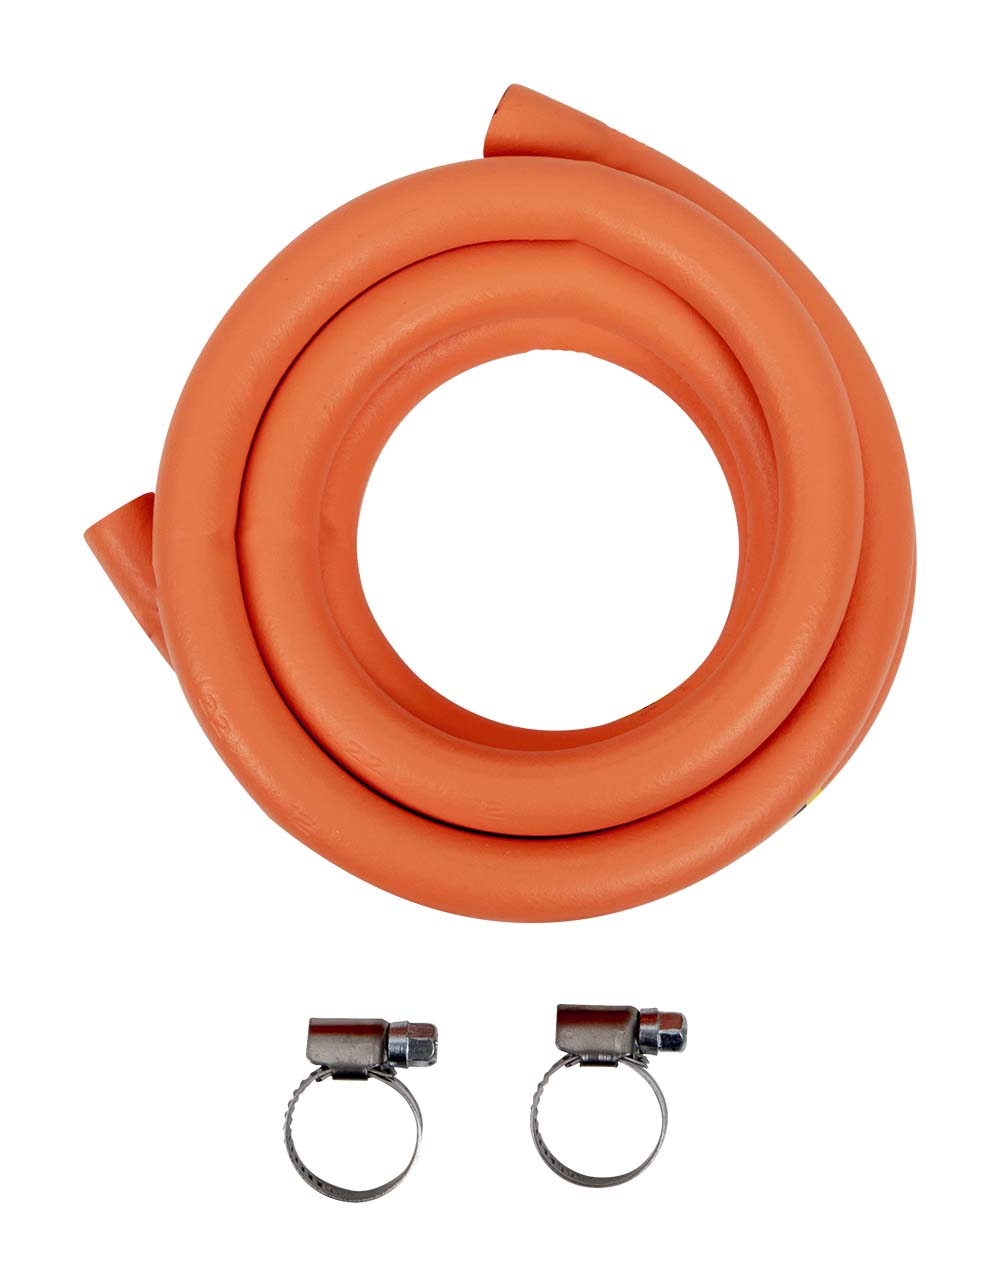 8420750 A gas hose with 2 hose clamps. Suitable for propane and/or butane gas and to be used for among others, cooking devices, gas barbecues, heaters and such. The gas hose can be used in temperatures from -30 degrees Celsius and a gas pressure up to 20 bar (2mpa). The length of the gas hose amounts to 1.5 meter, the inner diameter is 15 mm. Meets the EN 16436 class 2 standard.